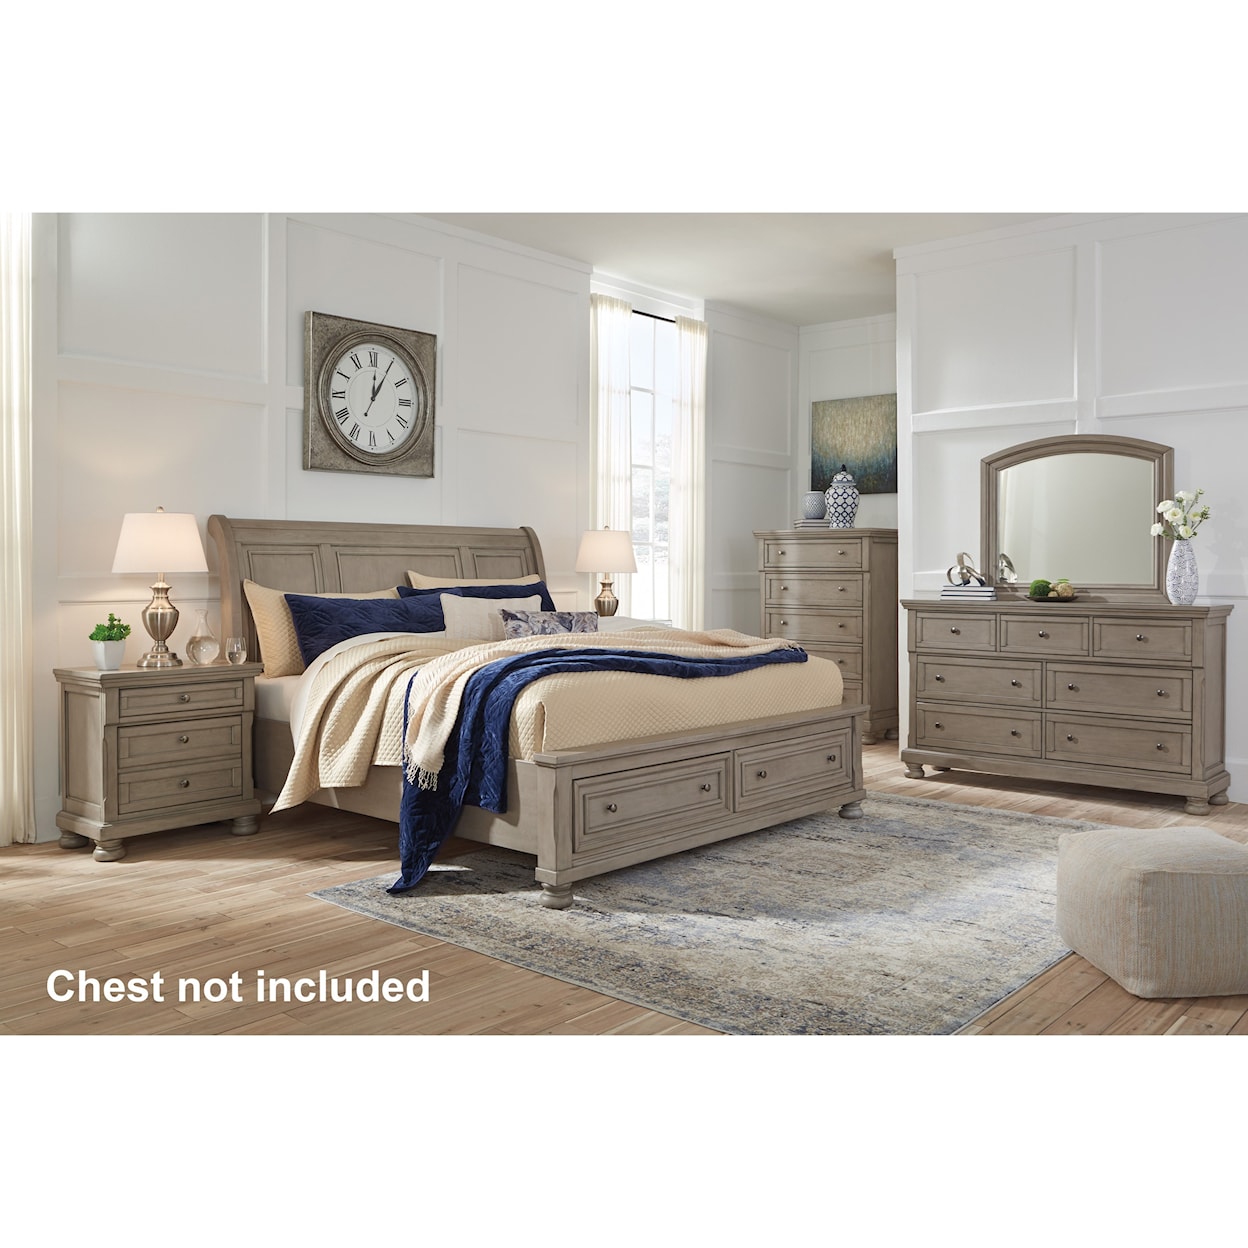 Signature Design by Ashley Lettner Queen Bedroom Group